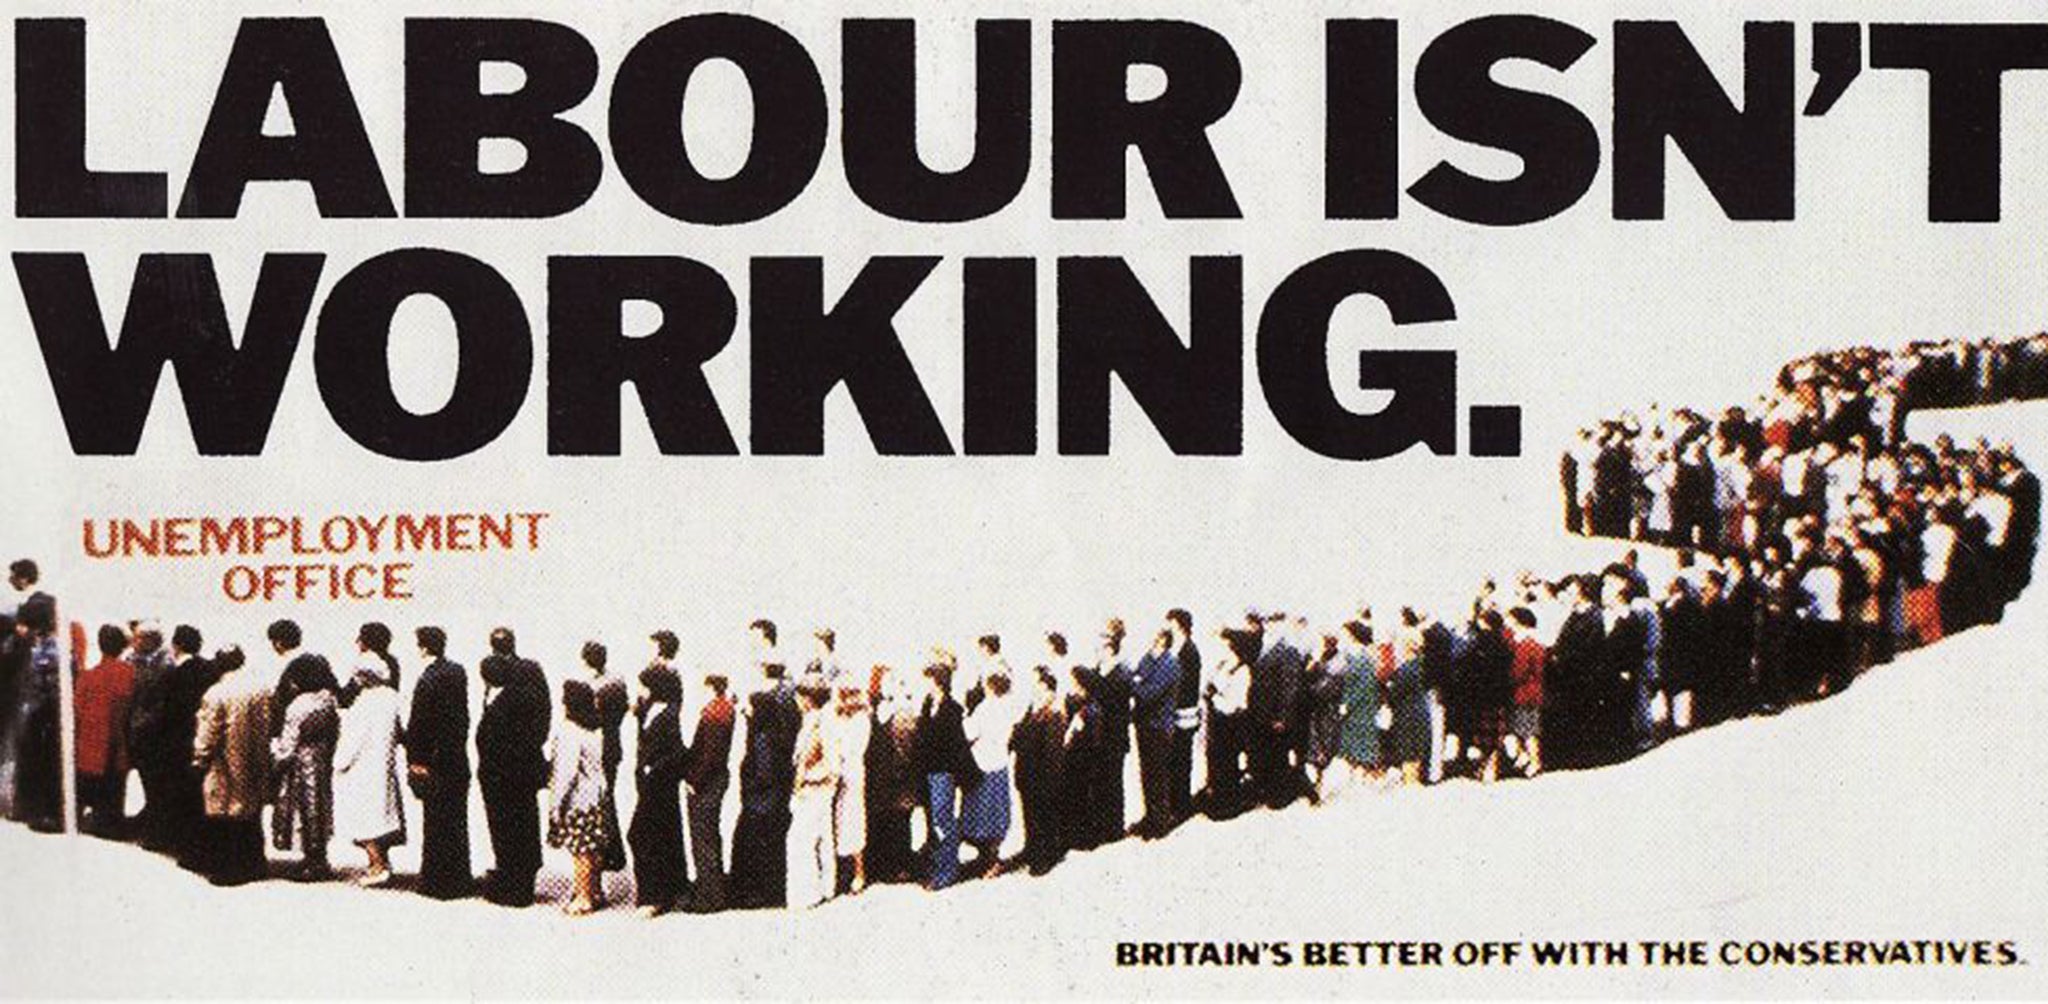 The Tory's famous election poster used during the run-up to the 1979 general election